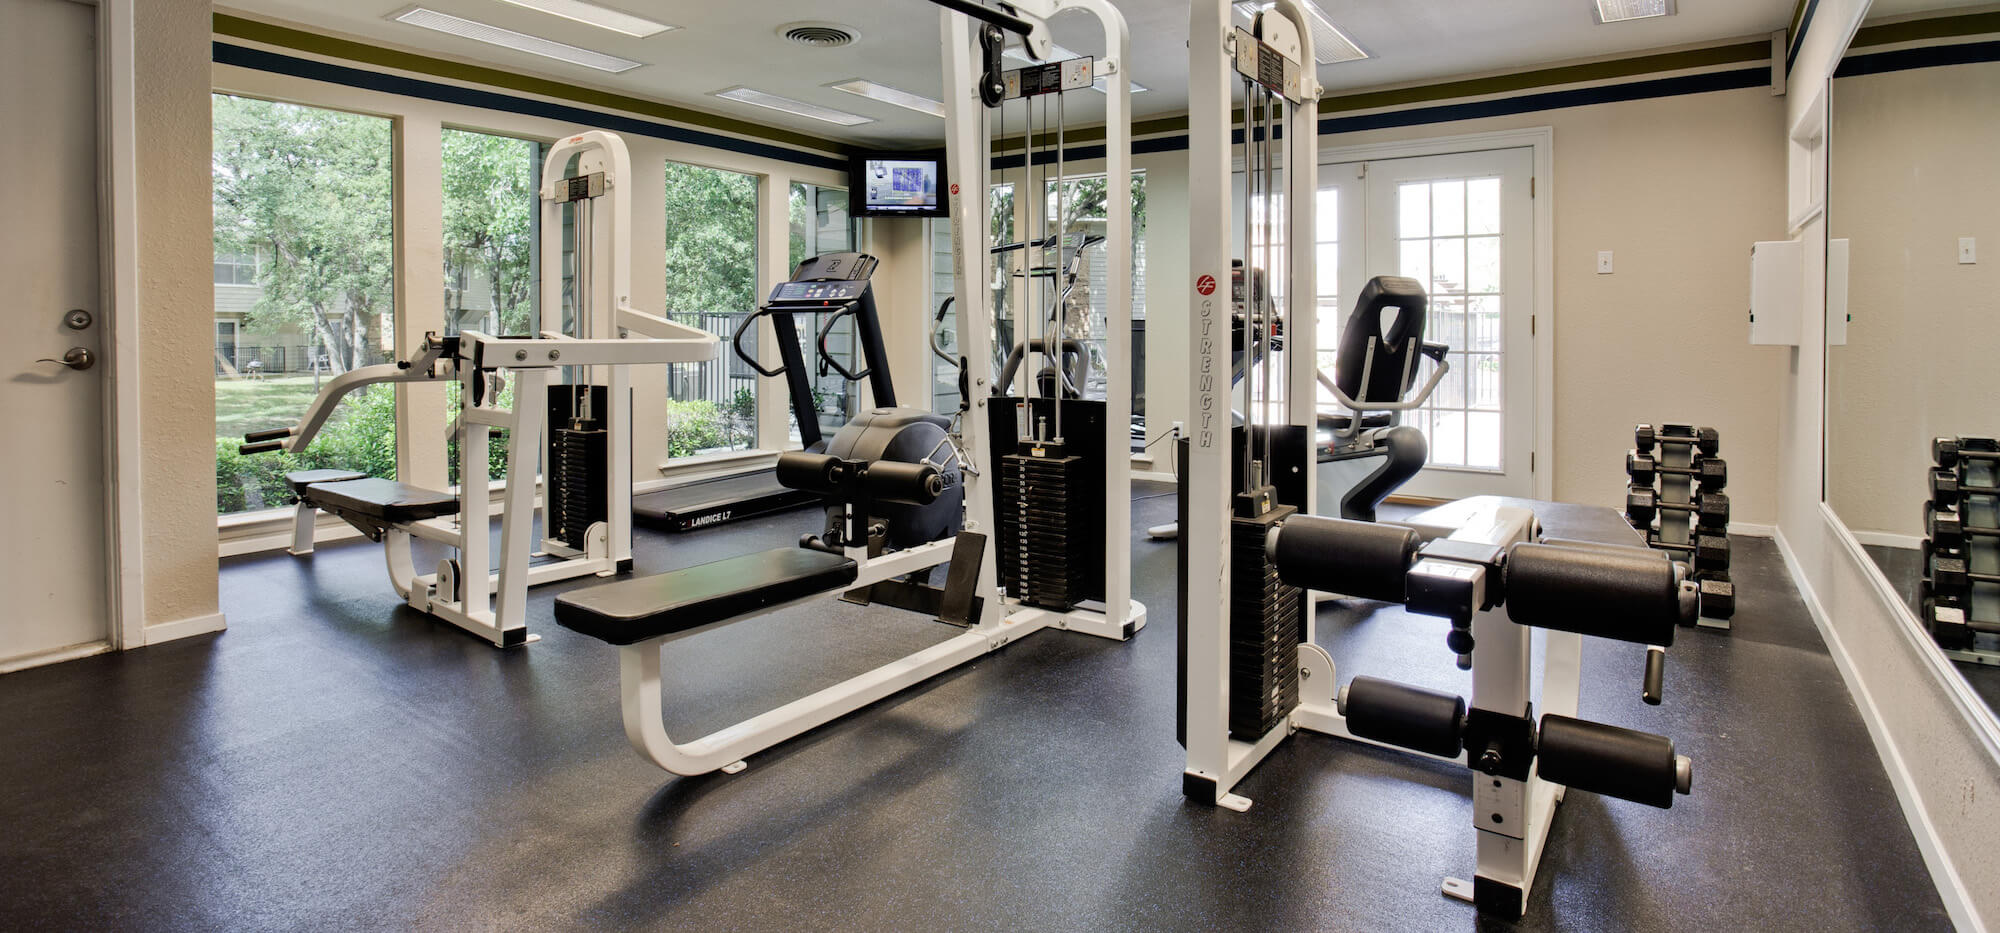 The Creek on Park Place fitness center